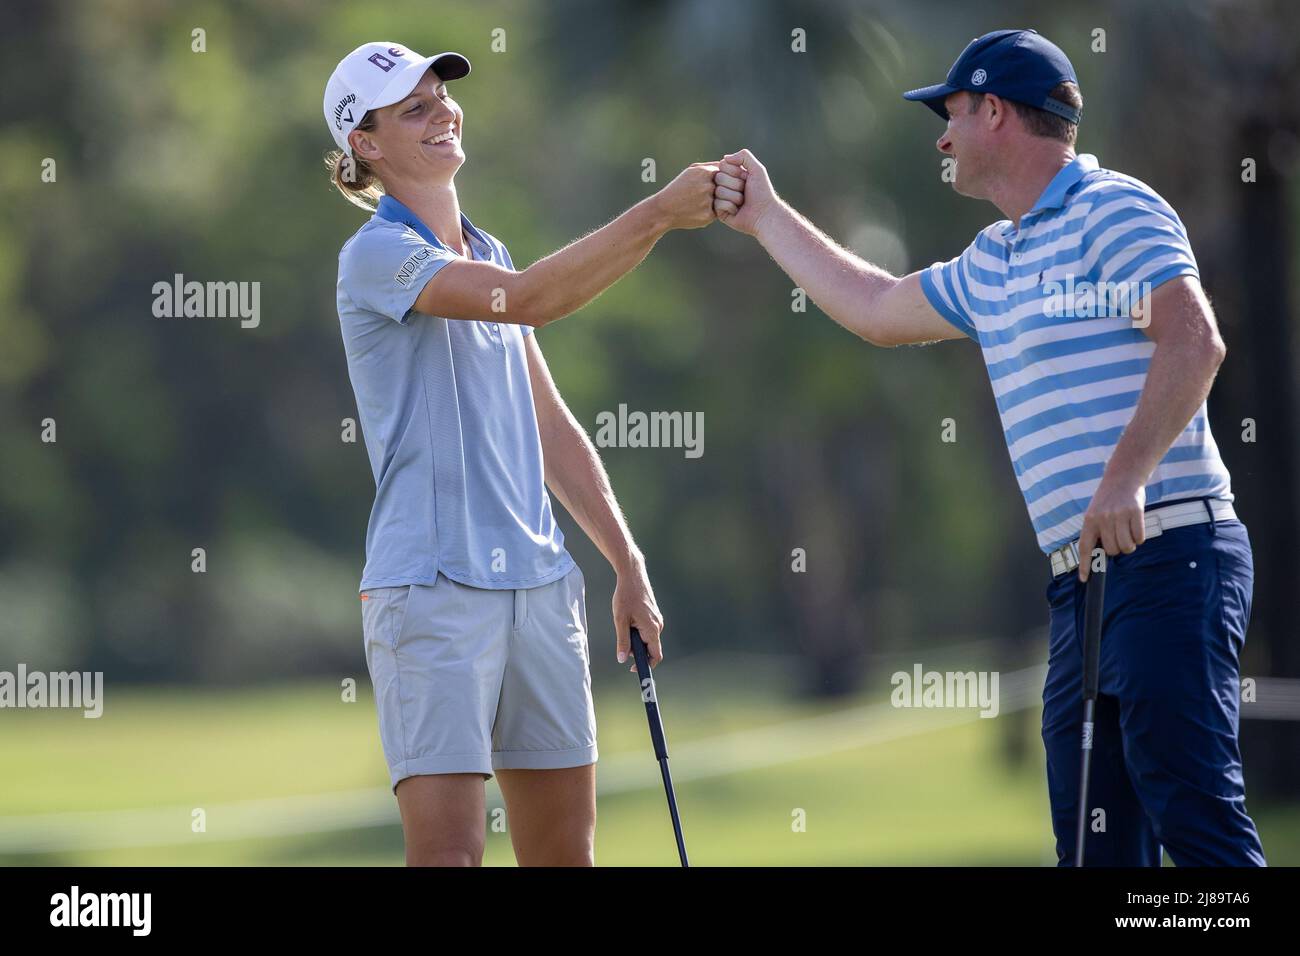 BANG KAPONG THAILAND - May 13: Anne Van Dam of The Netherlands shares a box  with amateur James Davies-Yandel after making birdie on hole 18 during the  second round of the Aramco